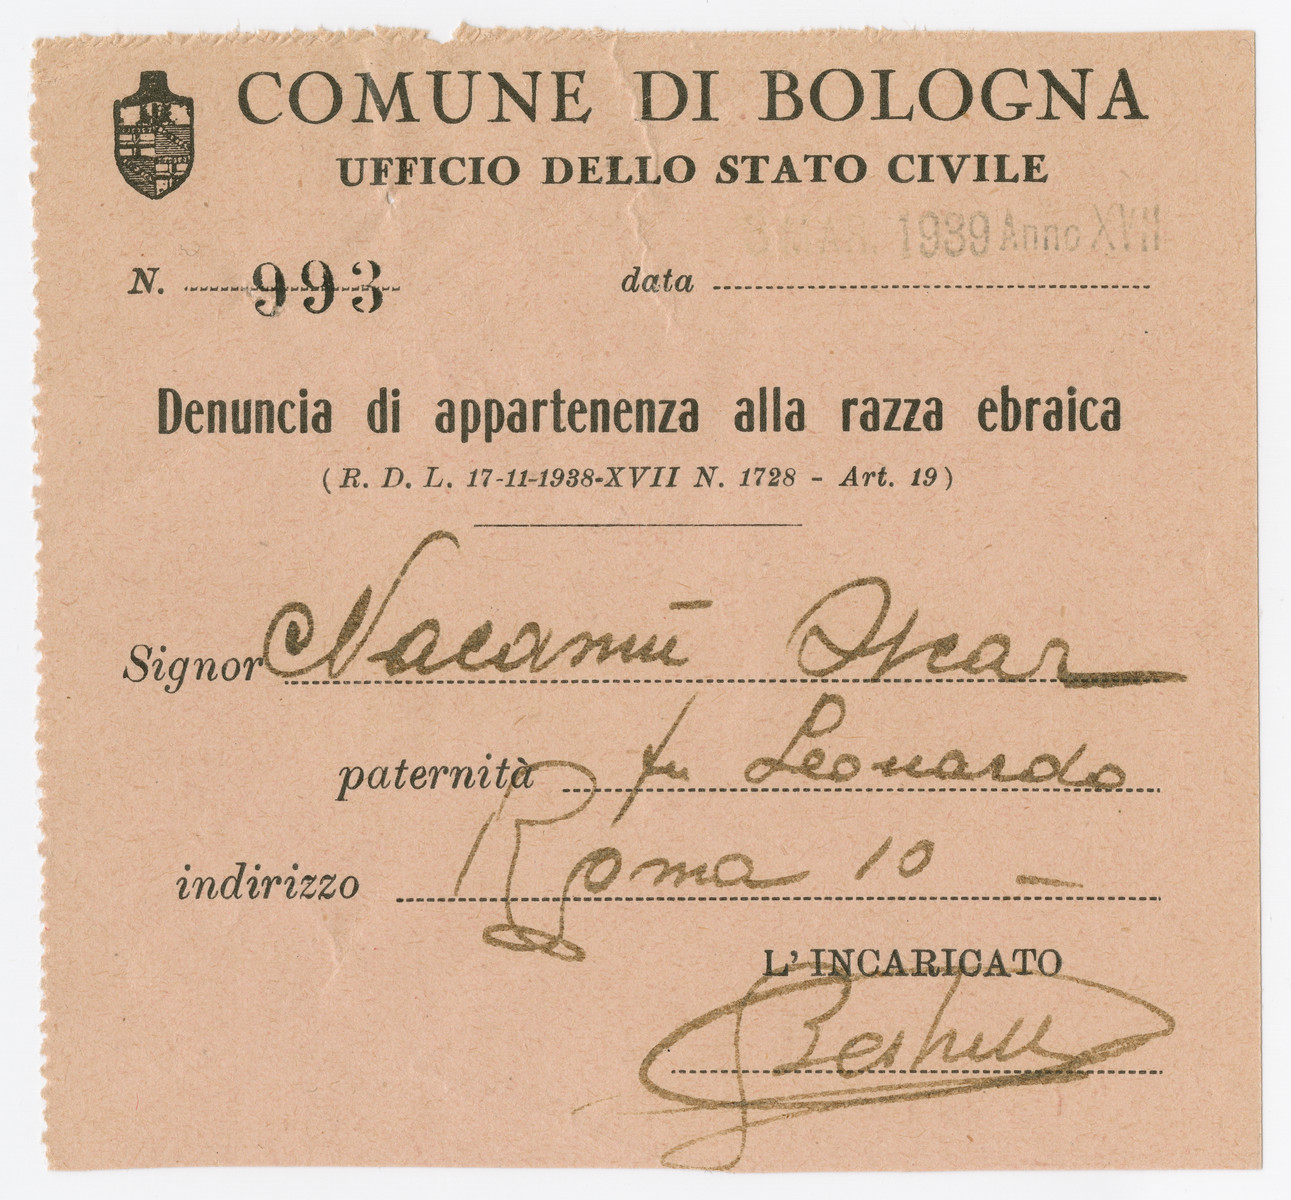 Document issued by the authorities of Bologna stating that Oscar Nacamu is a member of the Jewish race.